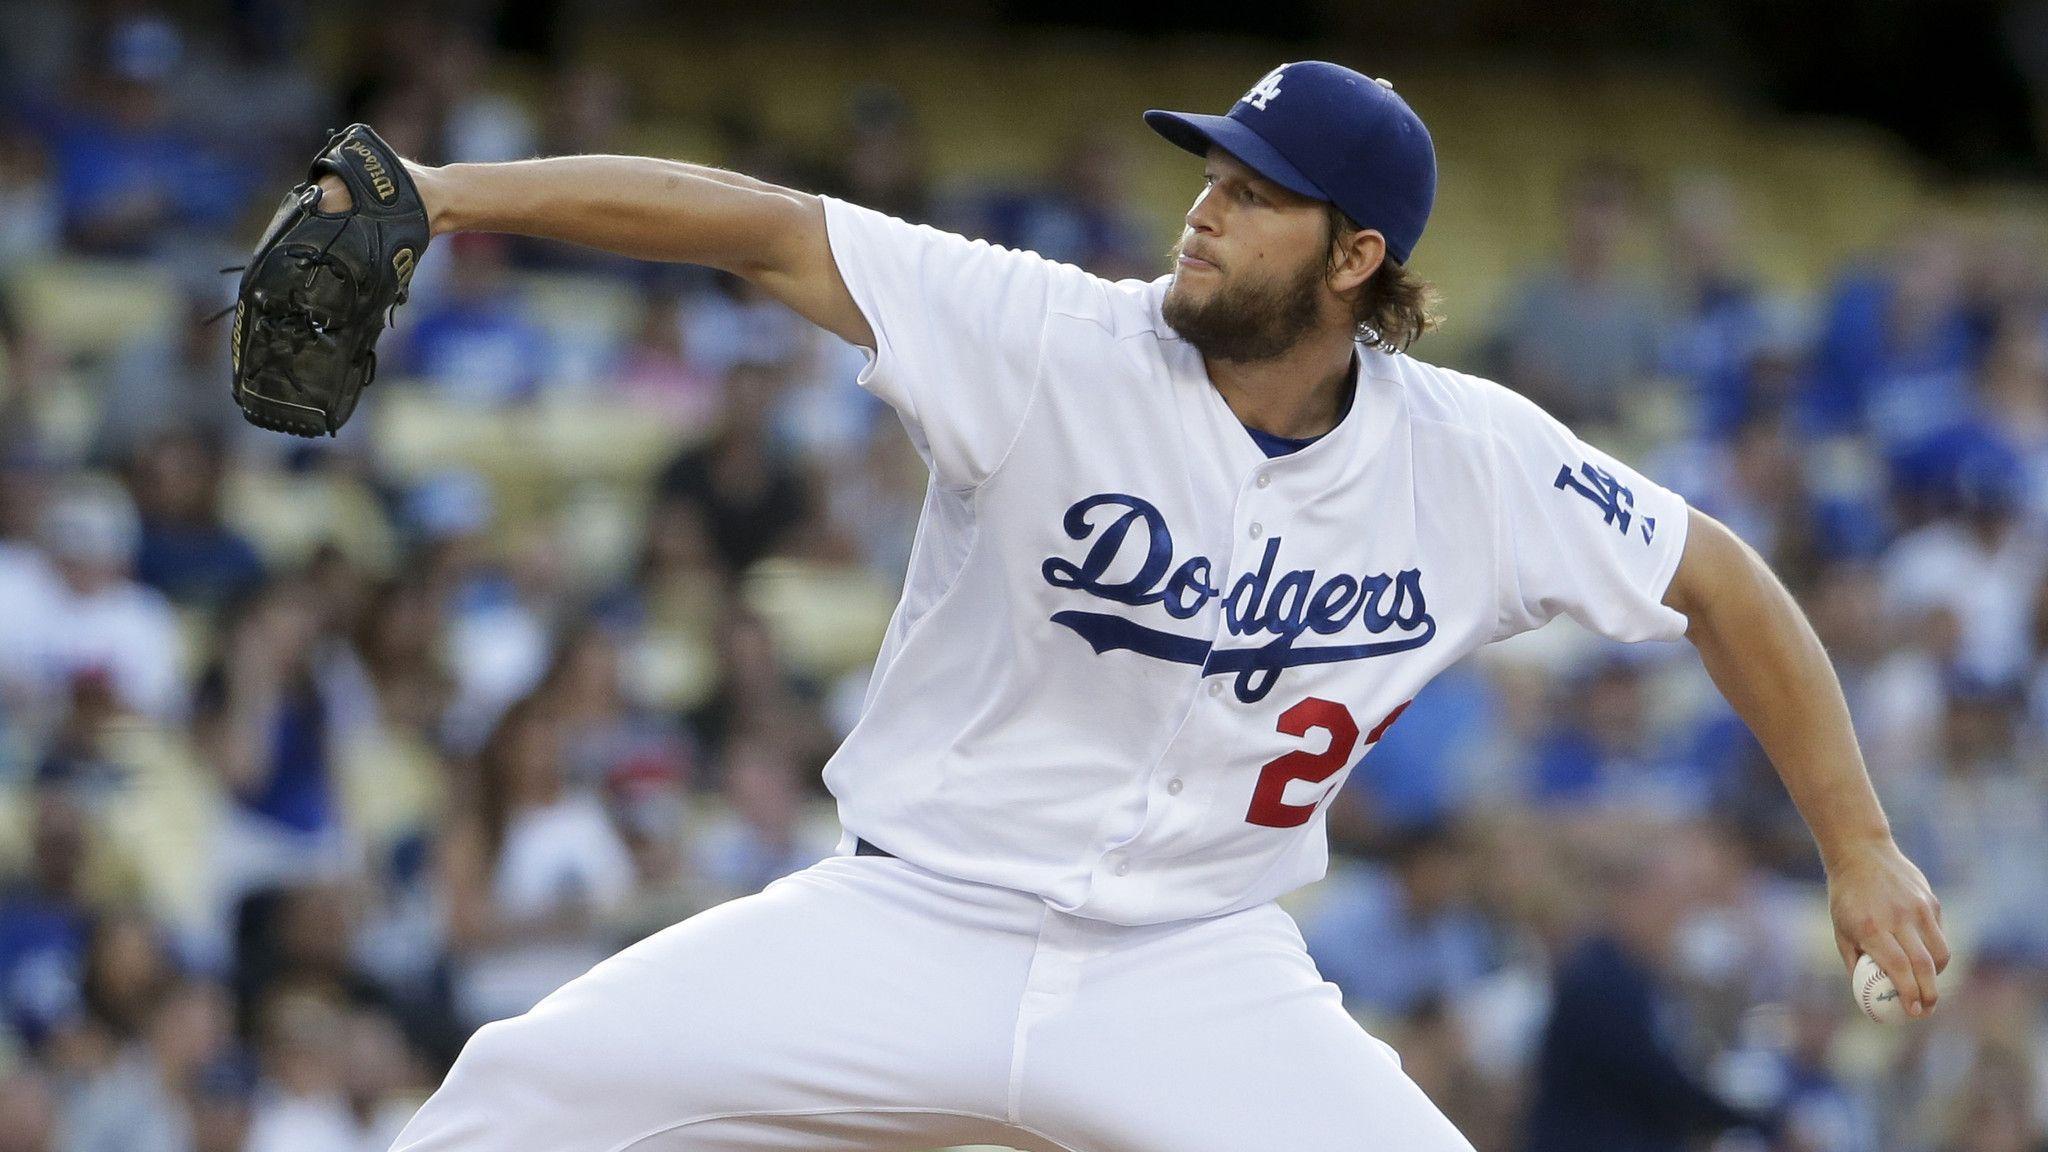 Dodgers' Clayton Kershaw will start against Nationals on Friday